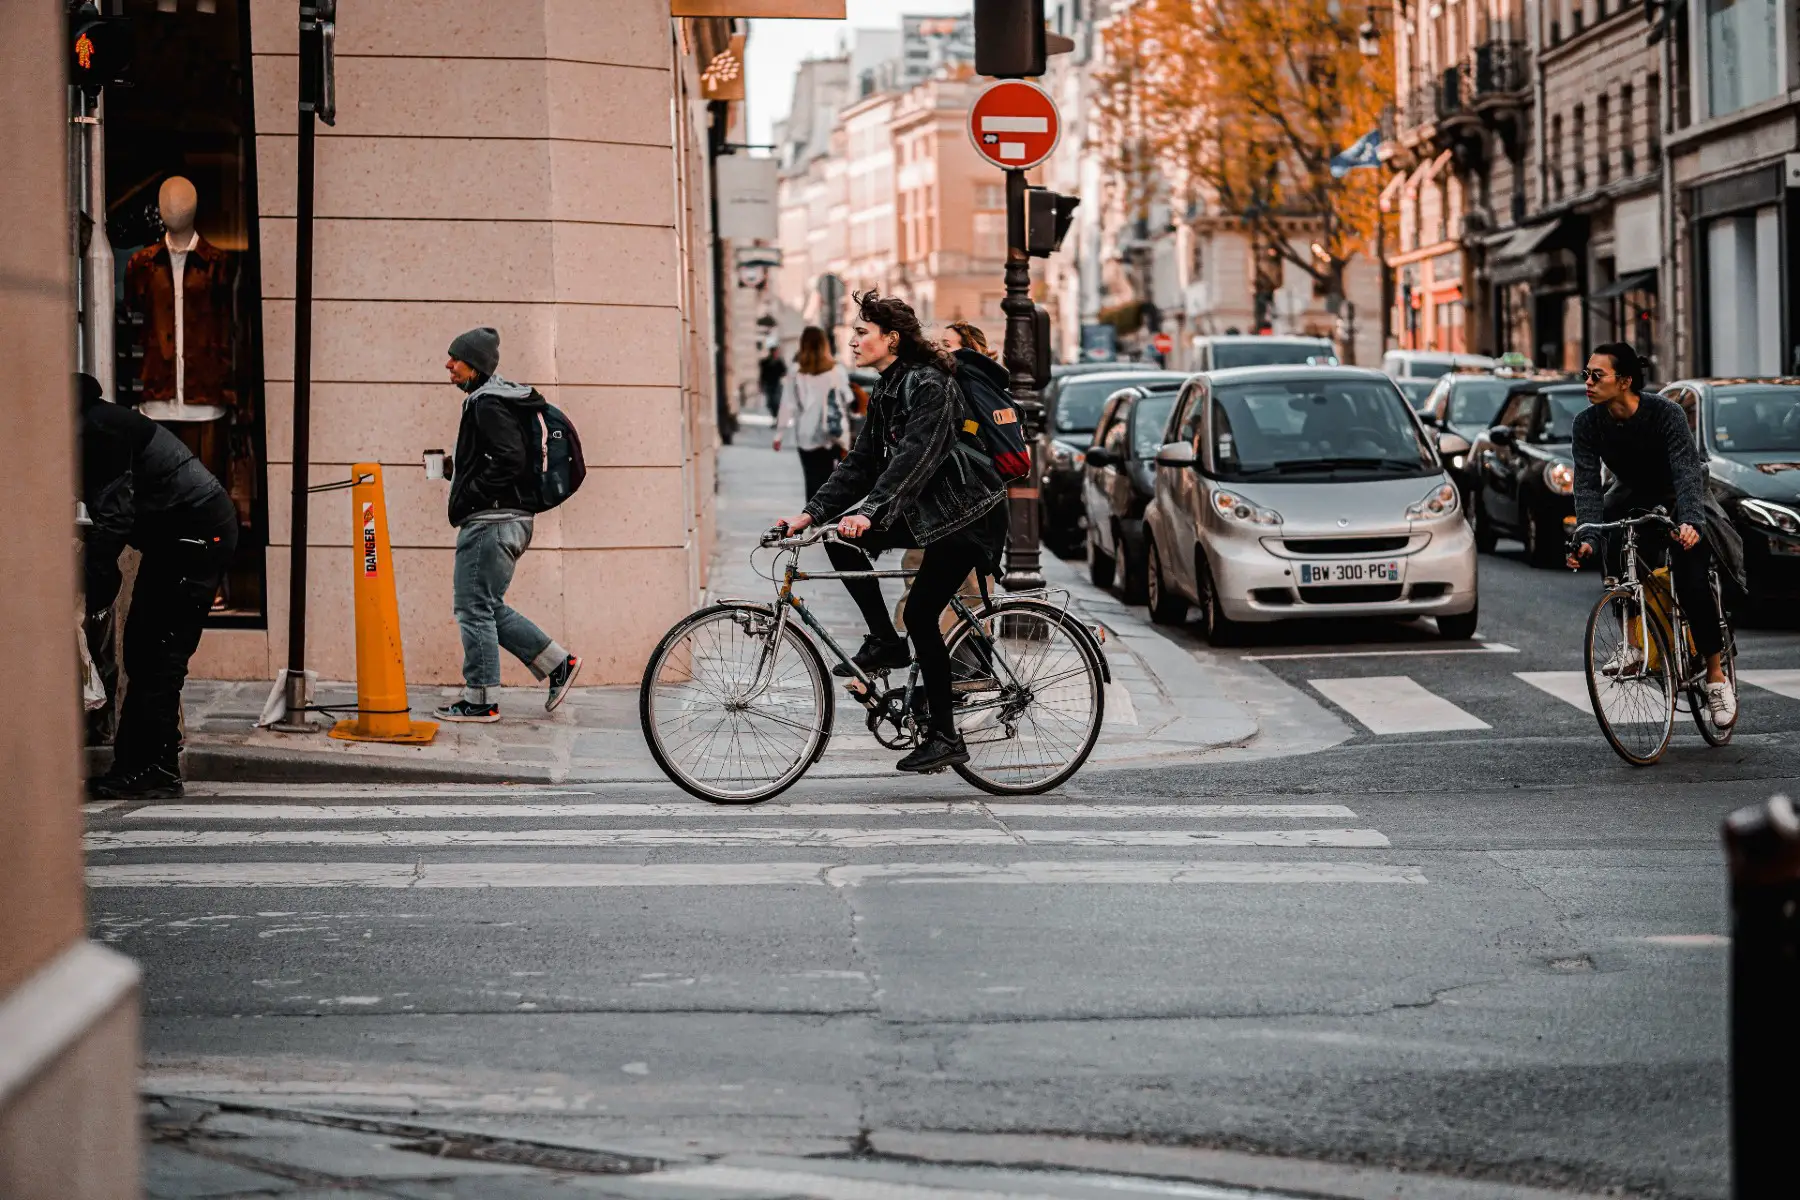 Cyclists moving between cars on a Parisian street